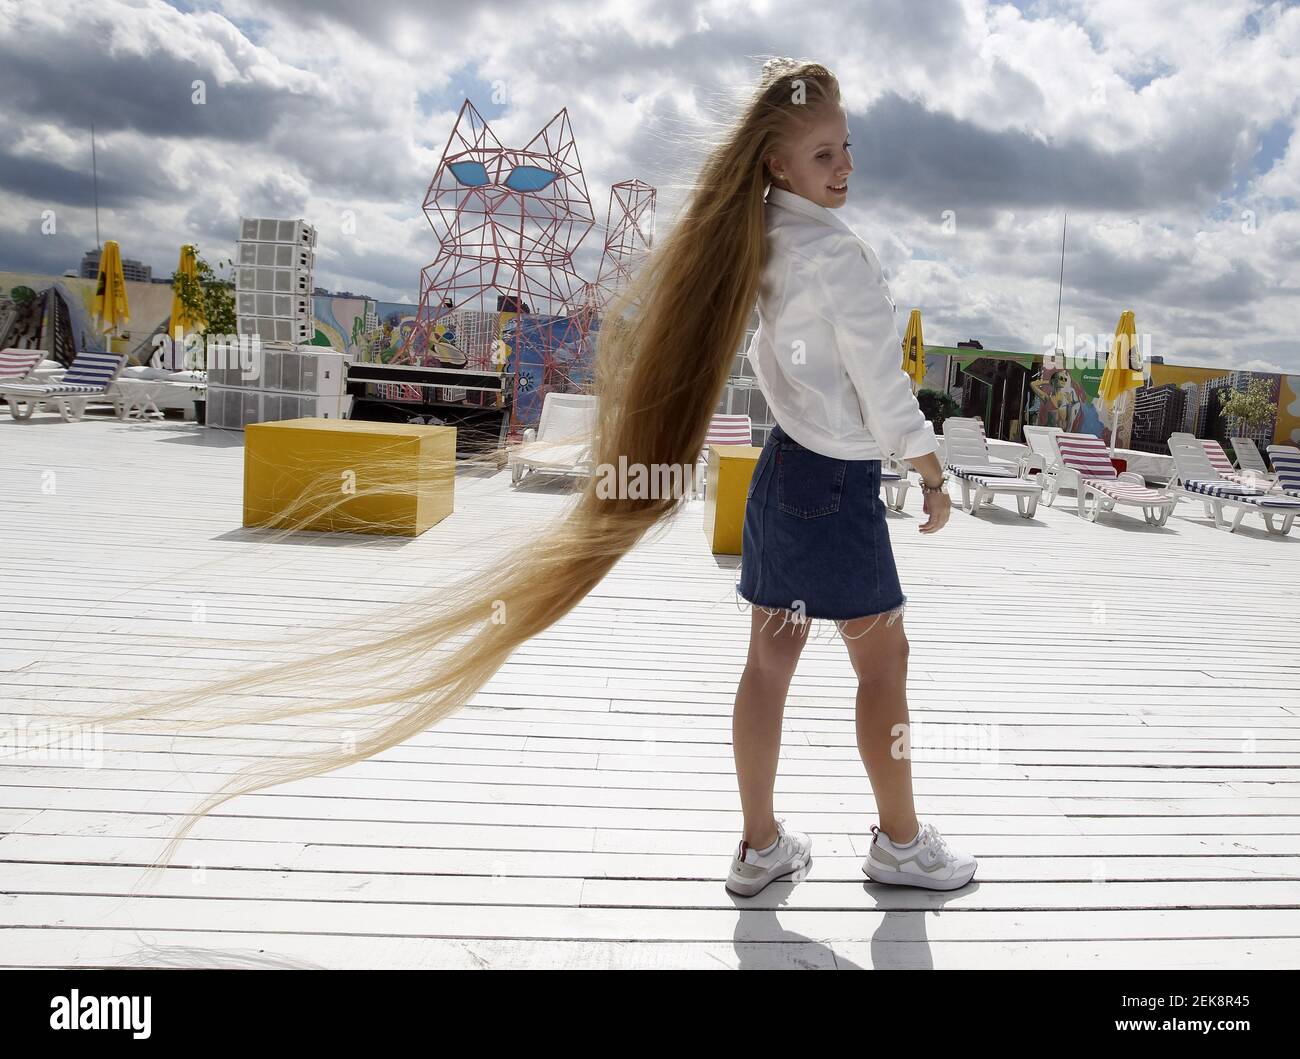 Olena Korzenyuk,17, who is a record holder for teenager with the longest  hair in Ukraine, shows her  m long hair during an event of the National  Registry of Records. Olena Korzenyuk